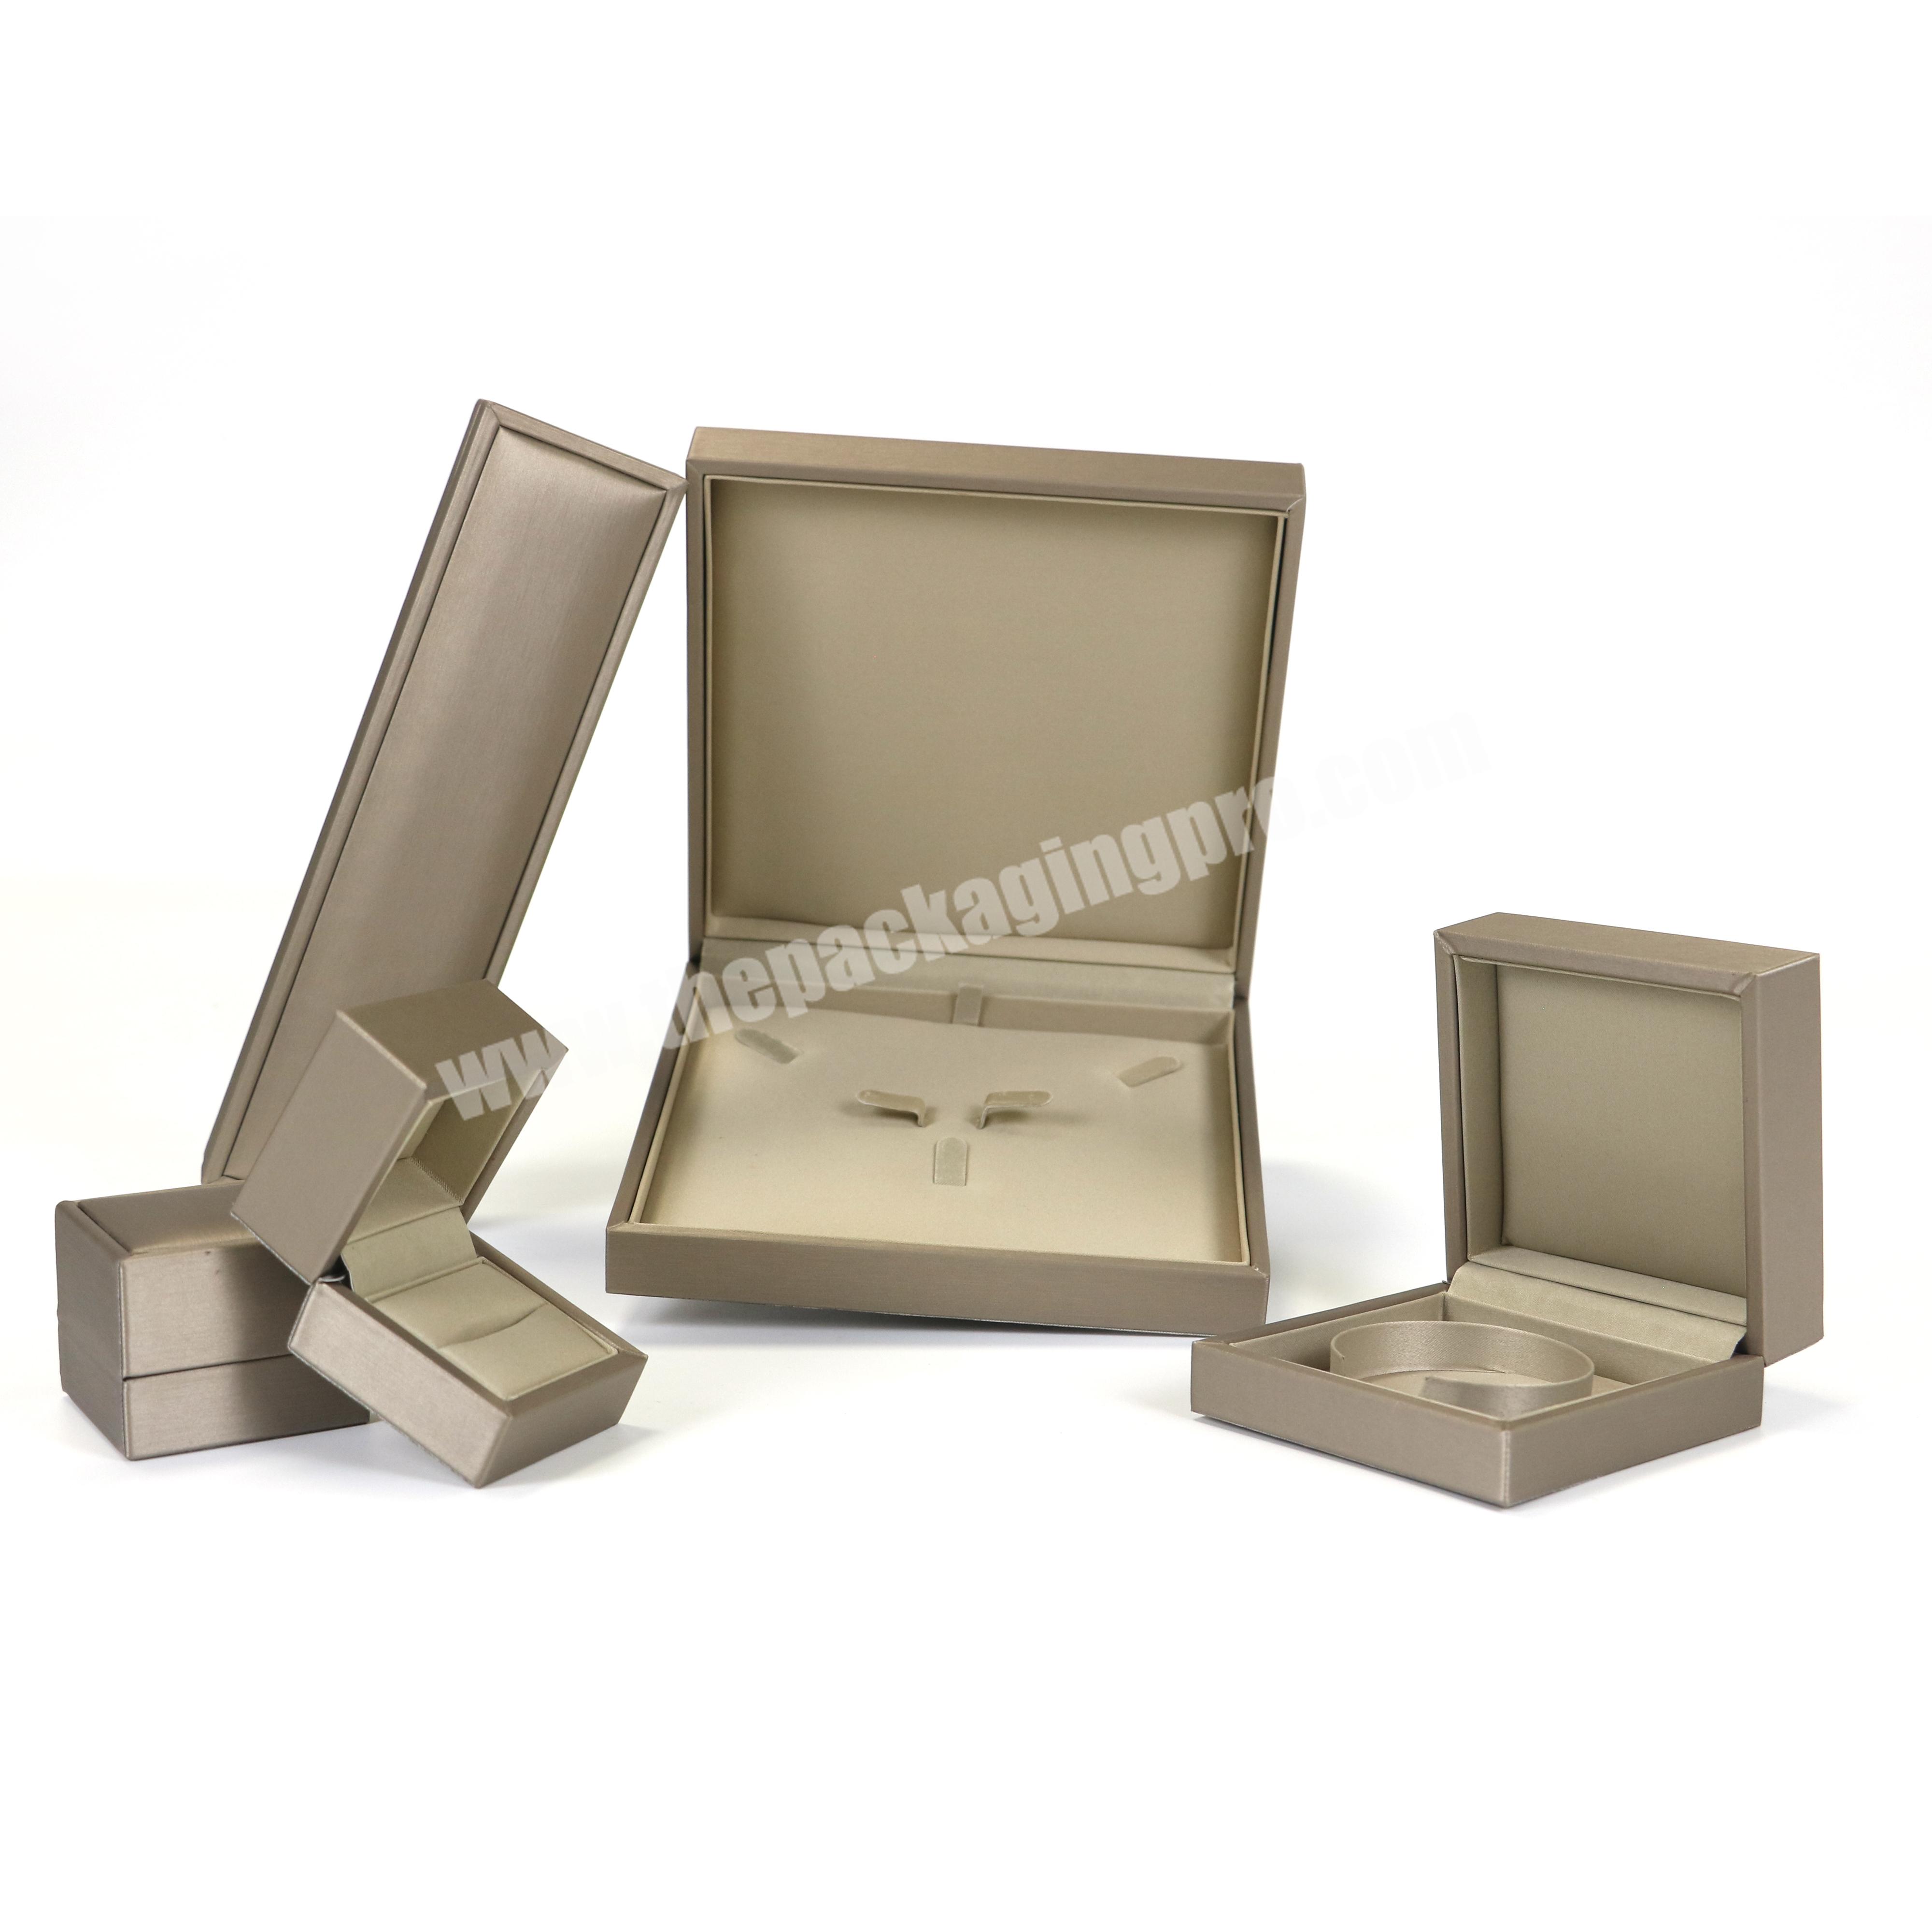 Custom Jewelry Boxes - Jewelry Packaging boxes